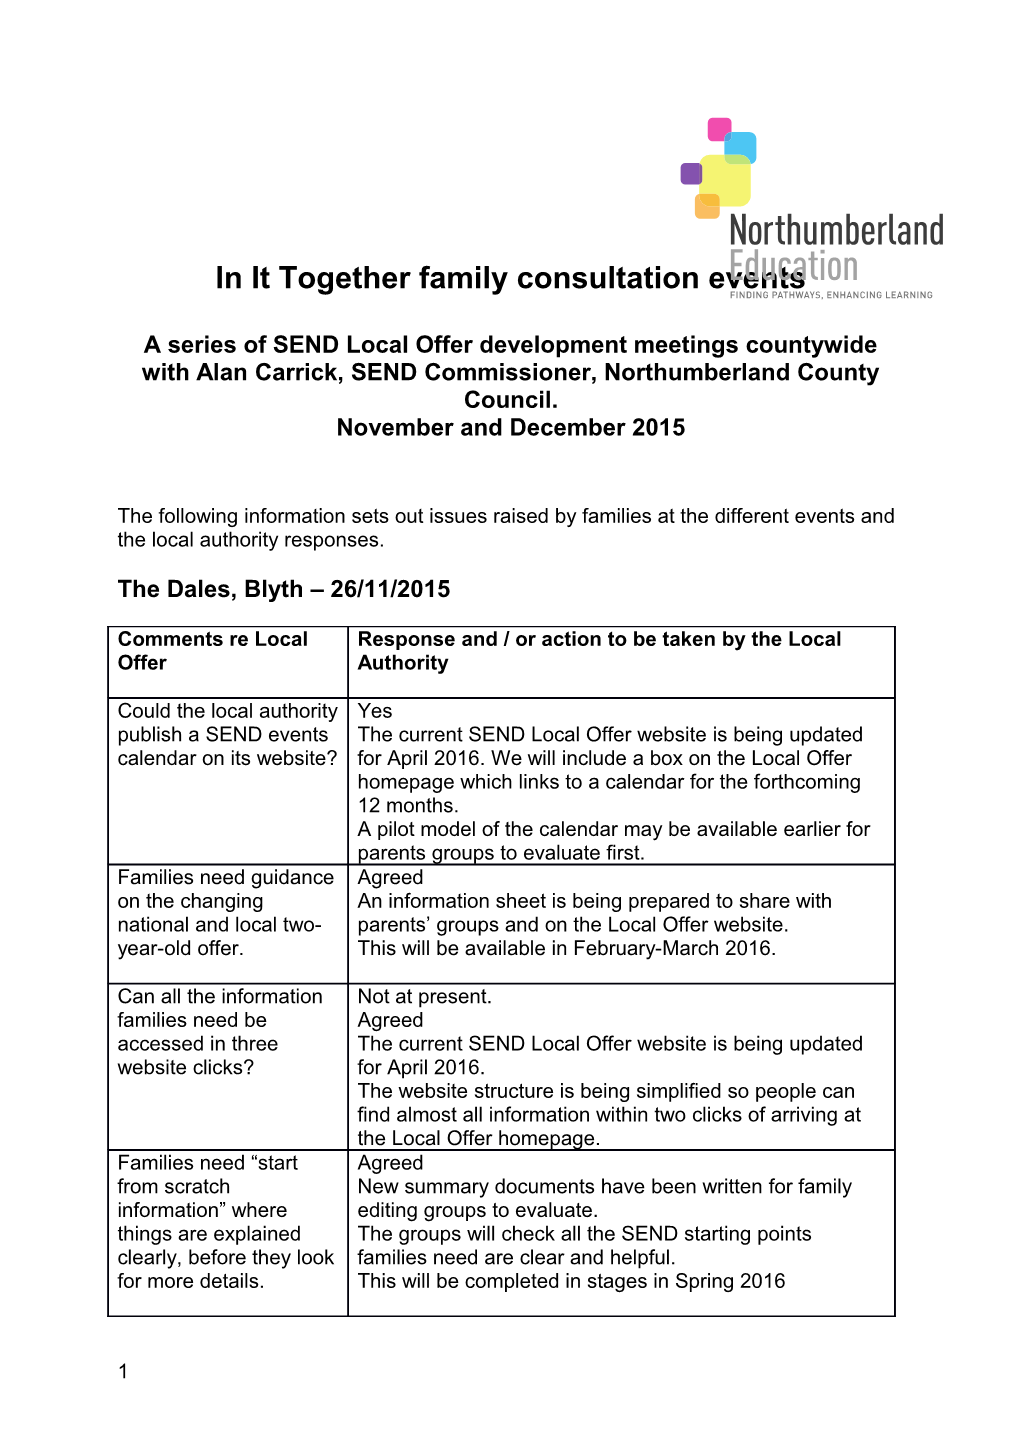 In It Together Family Consultation Events